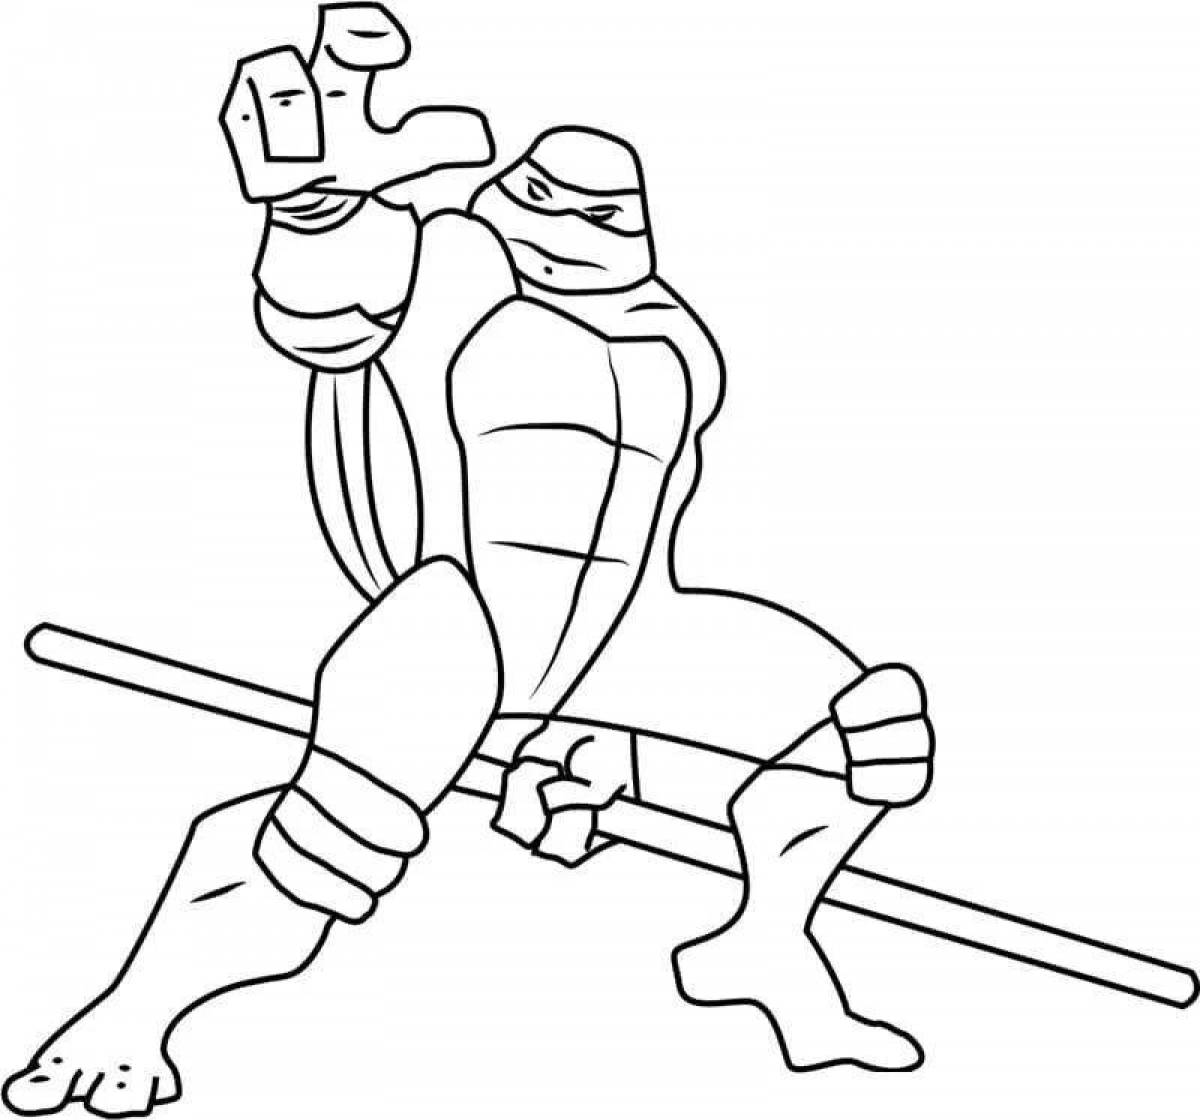 Animated ninja coloring pages for kids